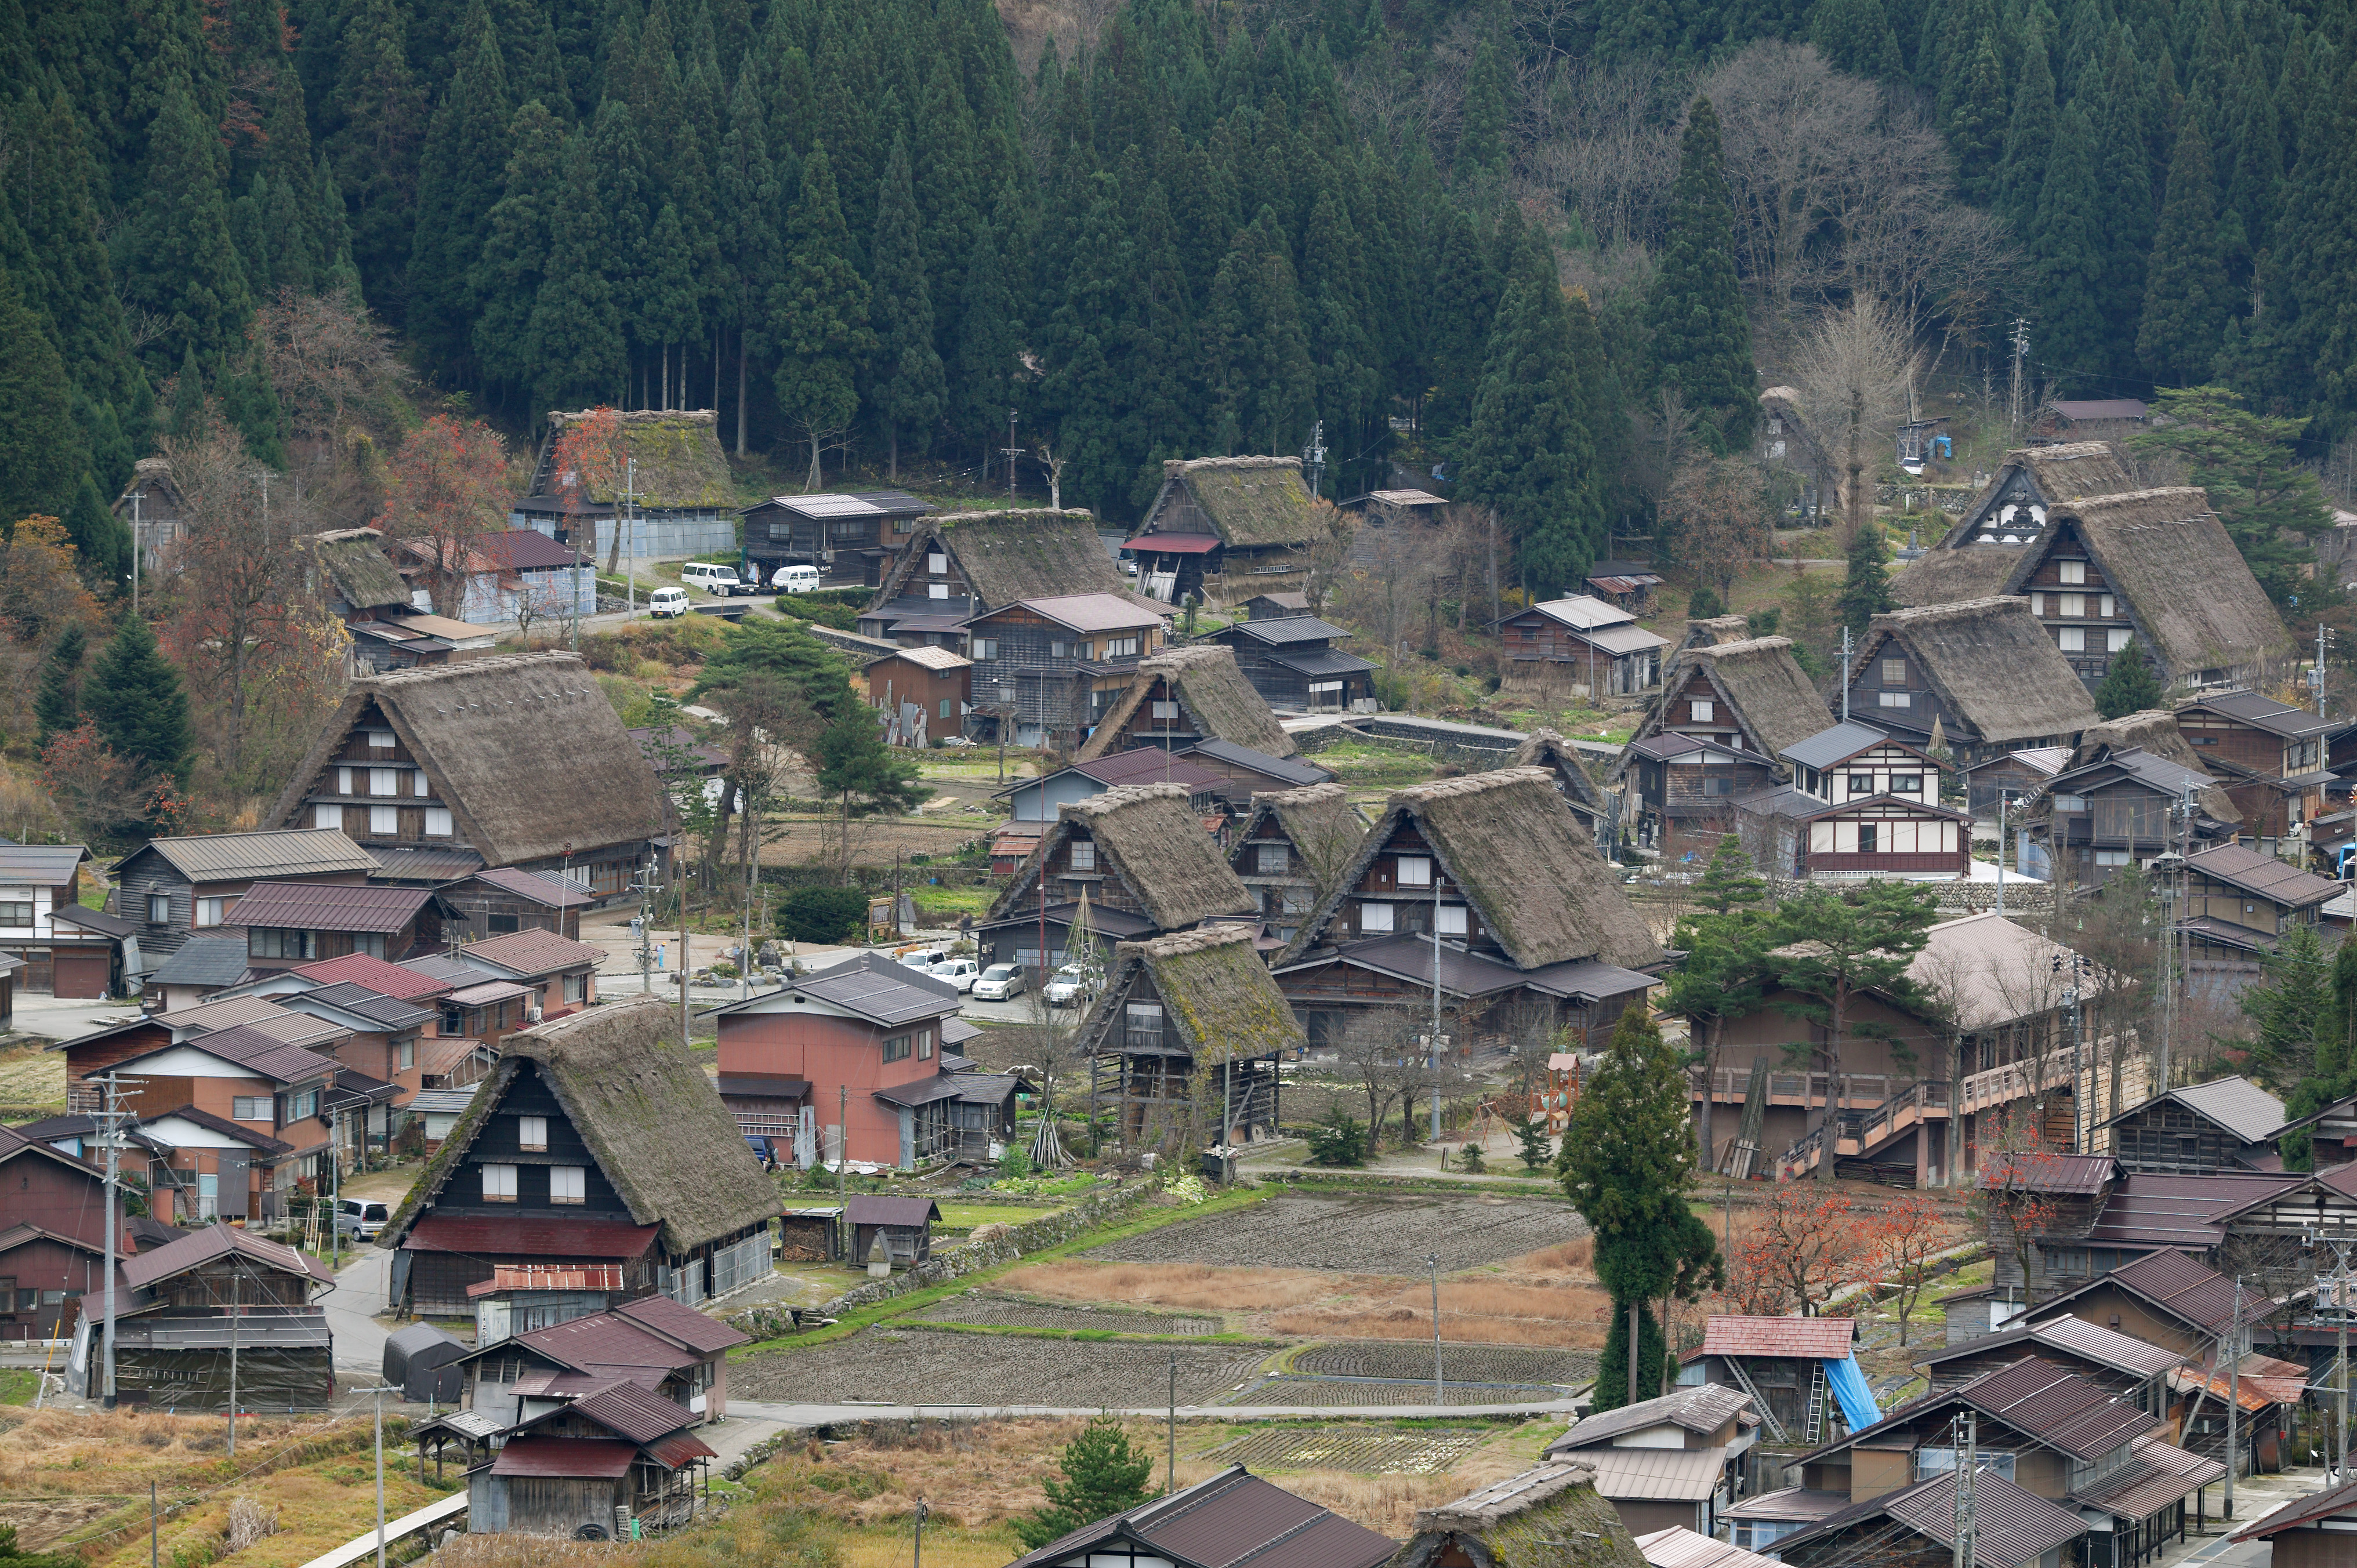 photo,material,free,landscape,picture,stock photo,Creative Commons,Shirakawago commanding, Architecture with principal ridgepole, Thatching, private house, rural scenery